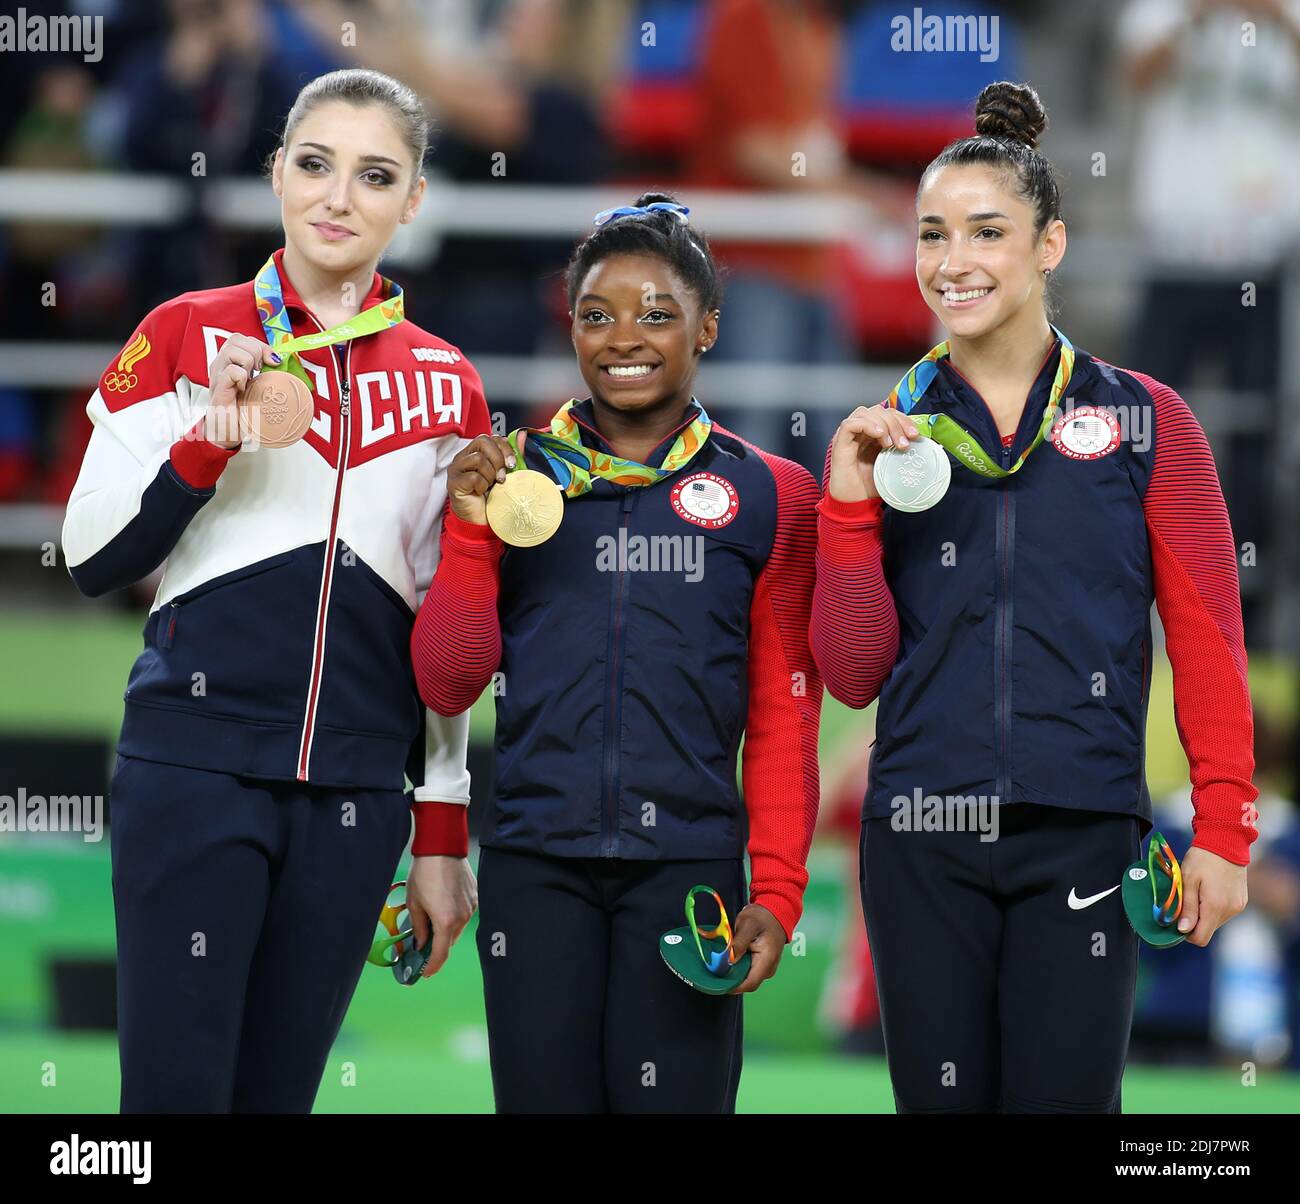 Aliya Mustafina of Russia, Simone Biles and Aly Raisman of the United States stand with their medals at the medal ceremony at the Women's Individual all around in artistic gymnastics at HSBC Arena (Arena Ol?mpica do Rio) at the 2016 Rio Summer Olympics in Rio de Janeiro, Brazil, on August 11, 2016. Simone Biles of the United States won the gold. Photo by Giuliano Bevilacqua/ABACAPRESS.COM Stock Photo